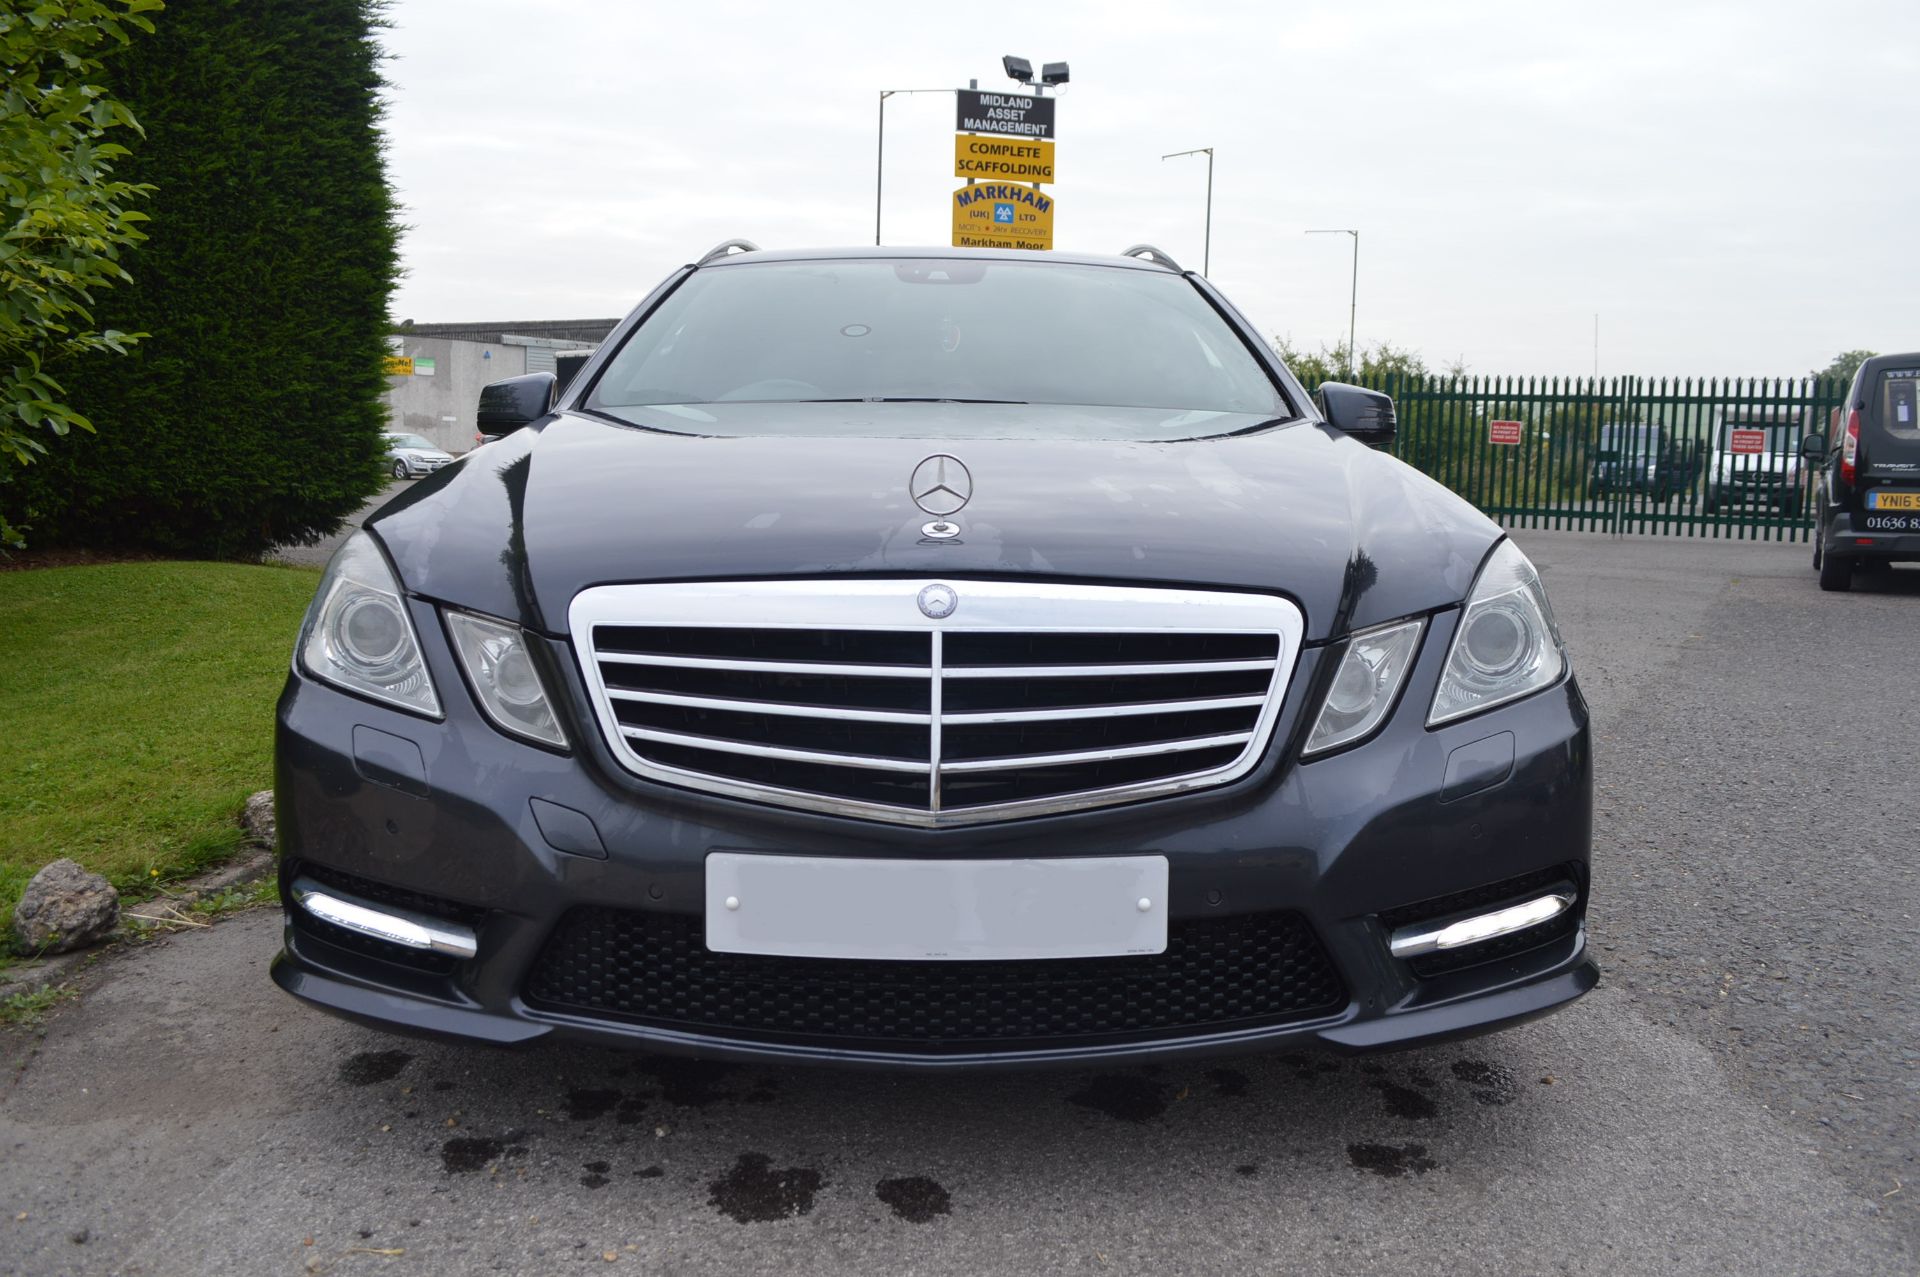 2011/61 REG MERCEDES-BENZ E350 SPORT ED125 CDI BLUE, REMAPPED TO APPROX 300BHP *NO VAT* - Image 3 of 29